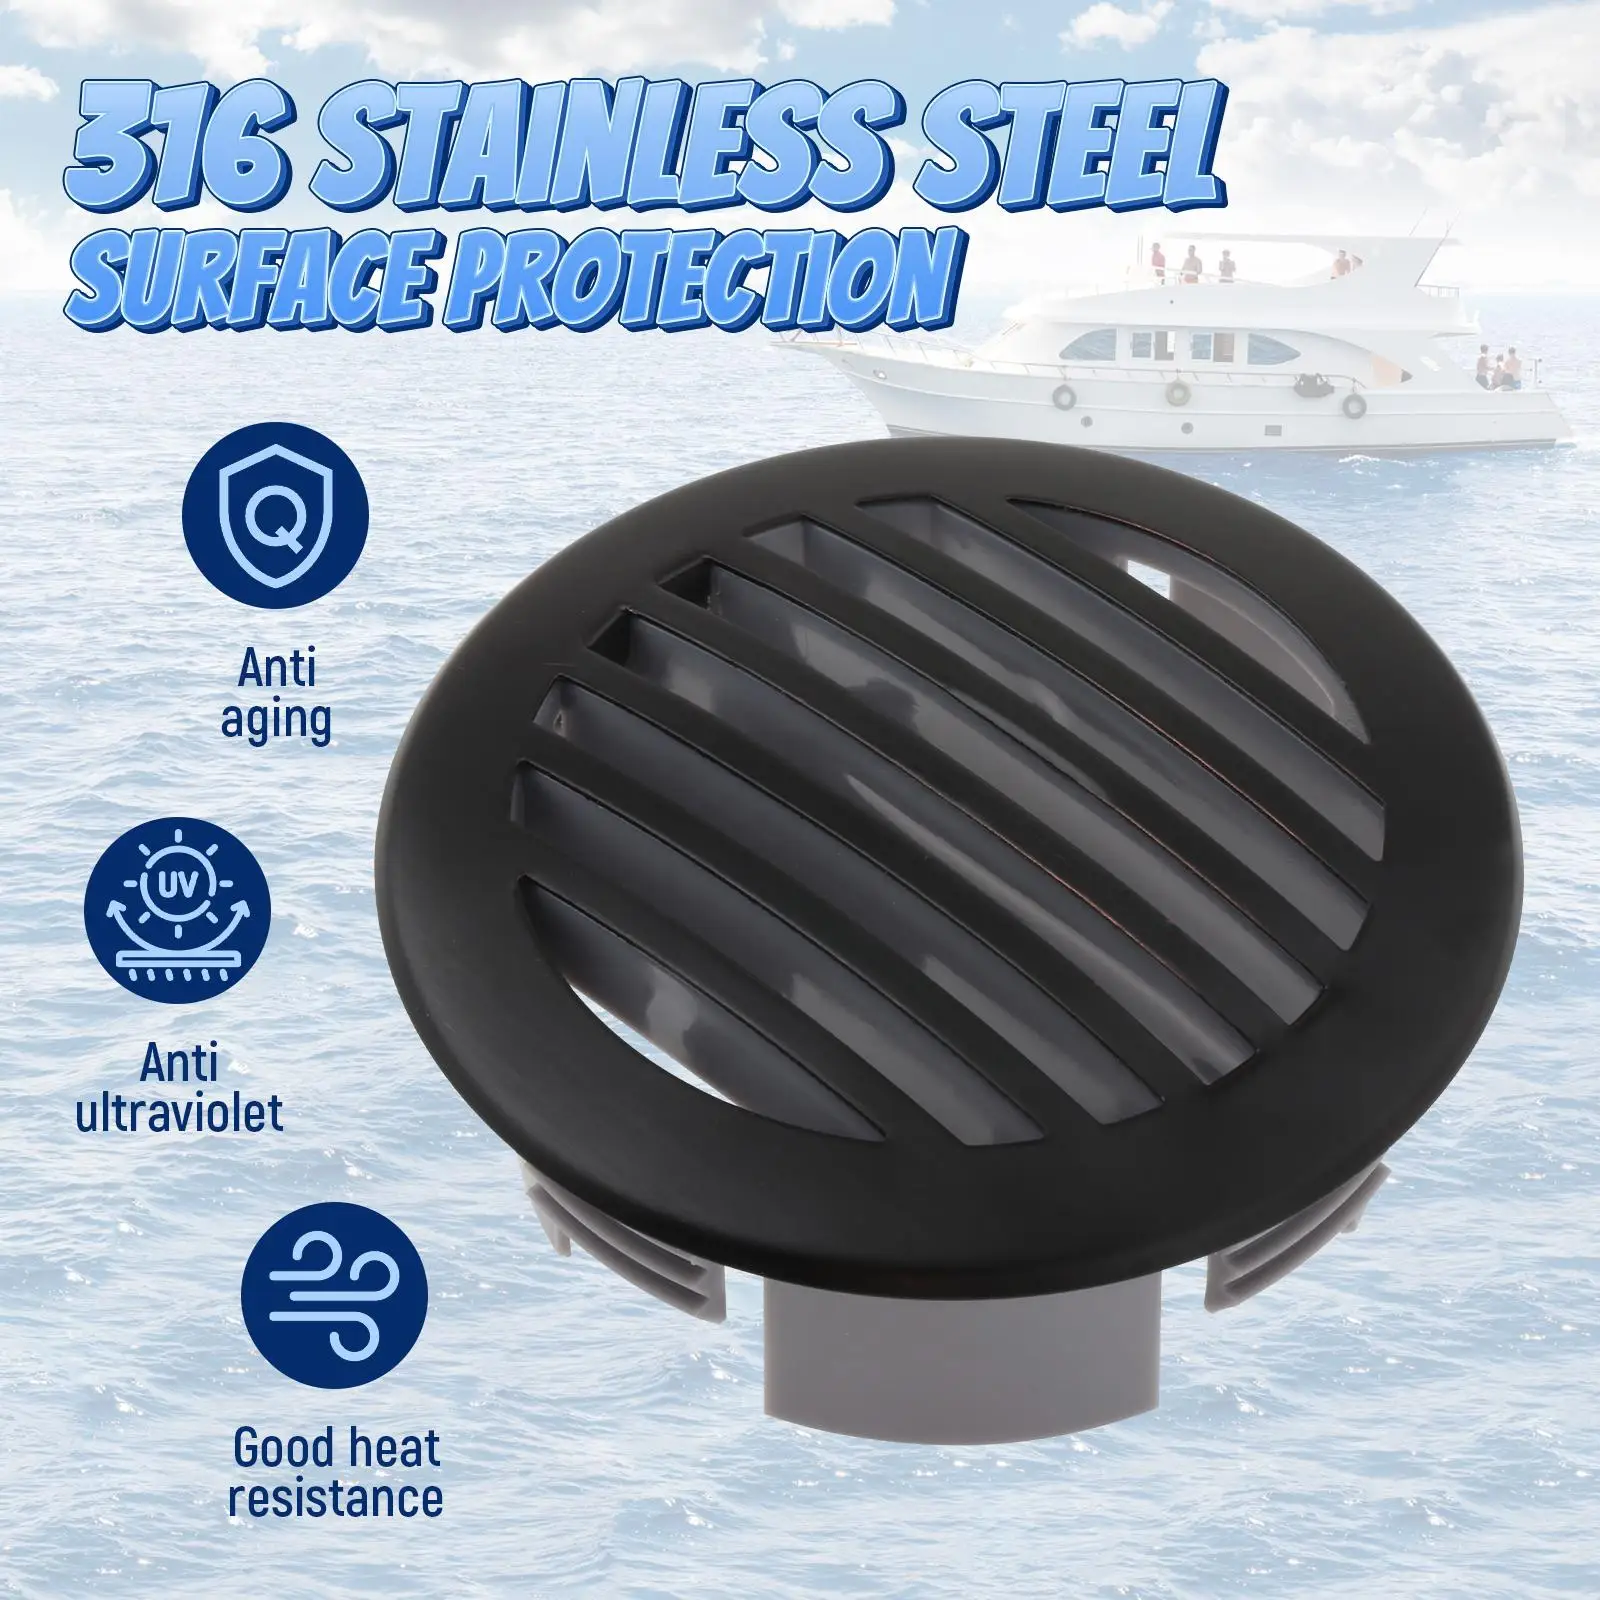 Stainless Grill Vent Cover Replaces Vent Hood Round Durable High Performance Round Air Vent Grille 81932ss-hp for Campers